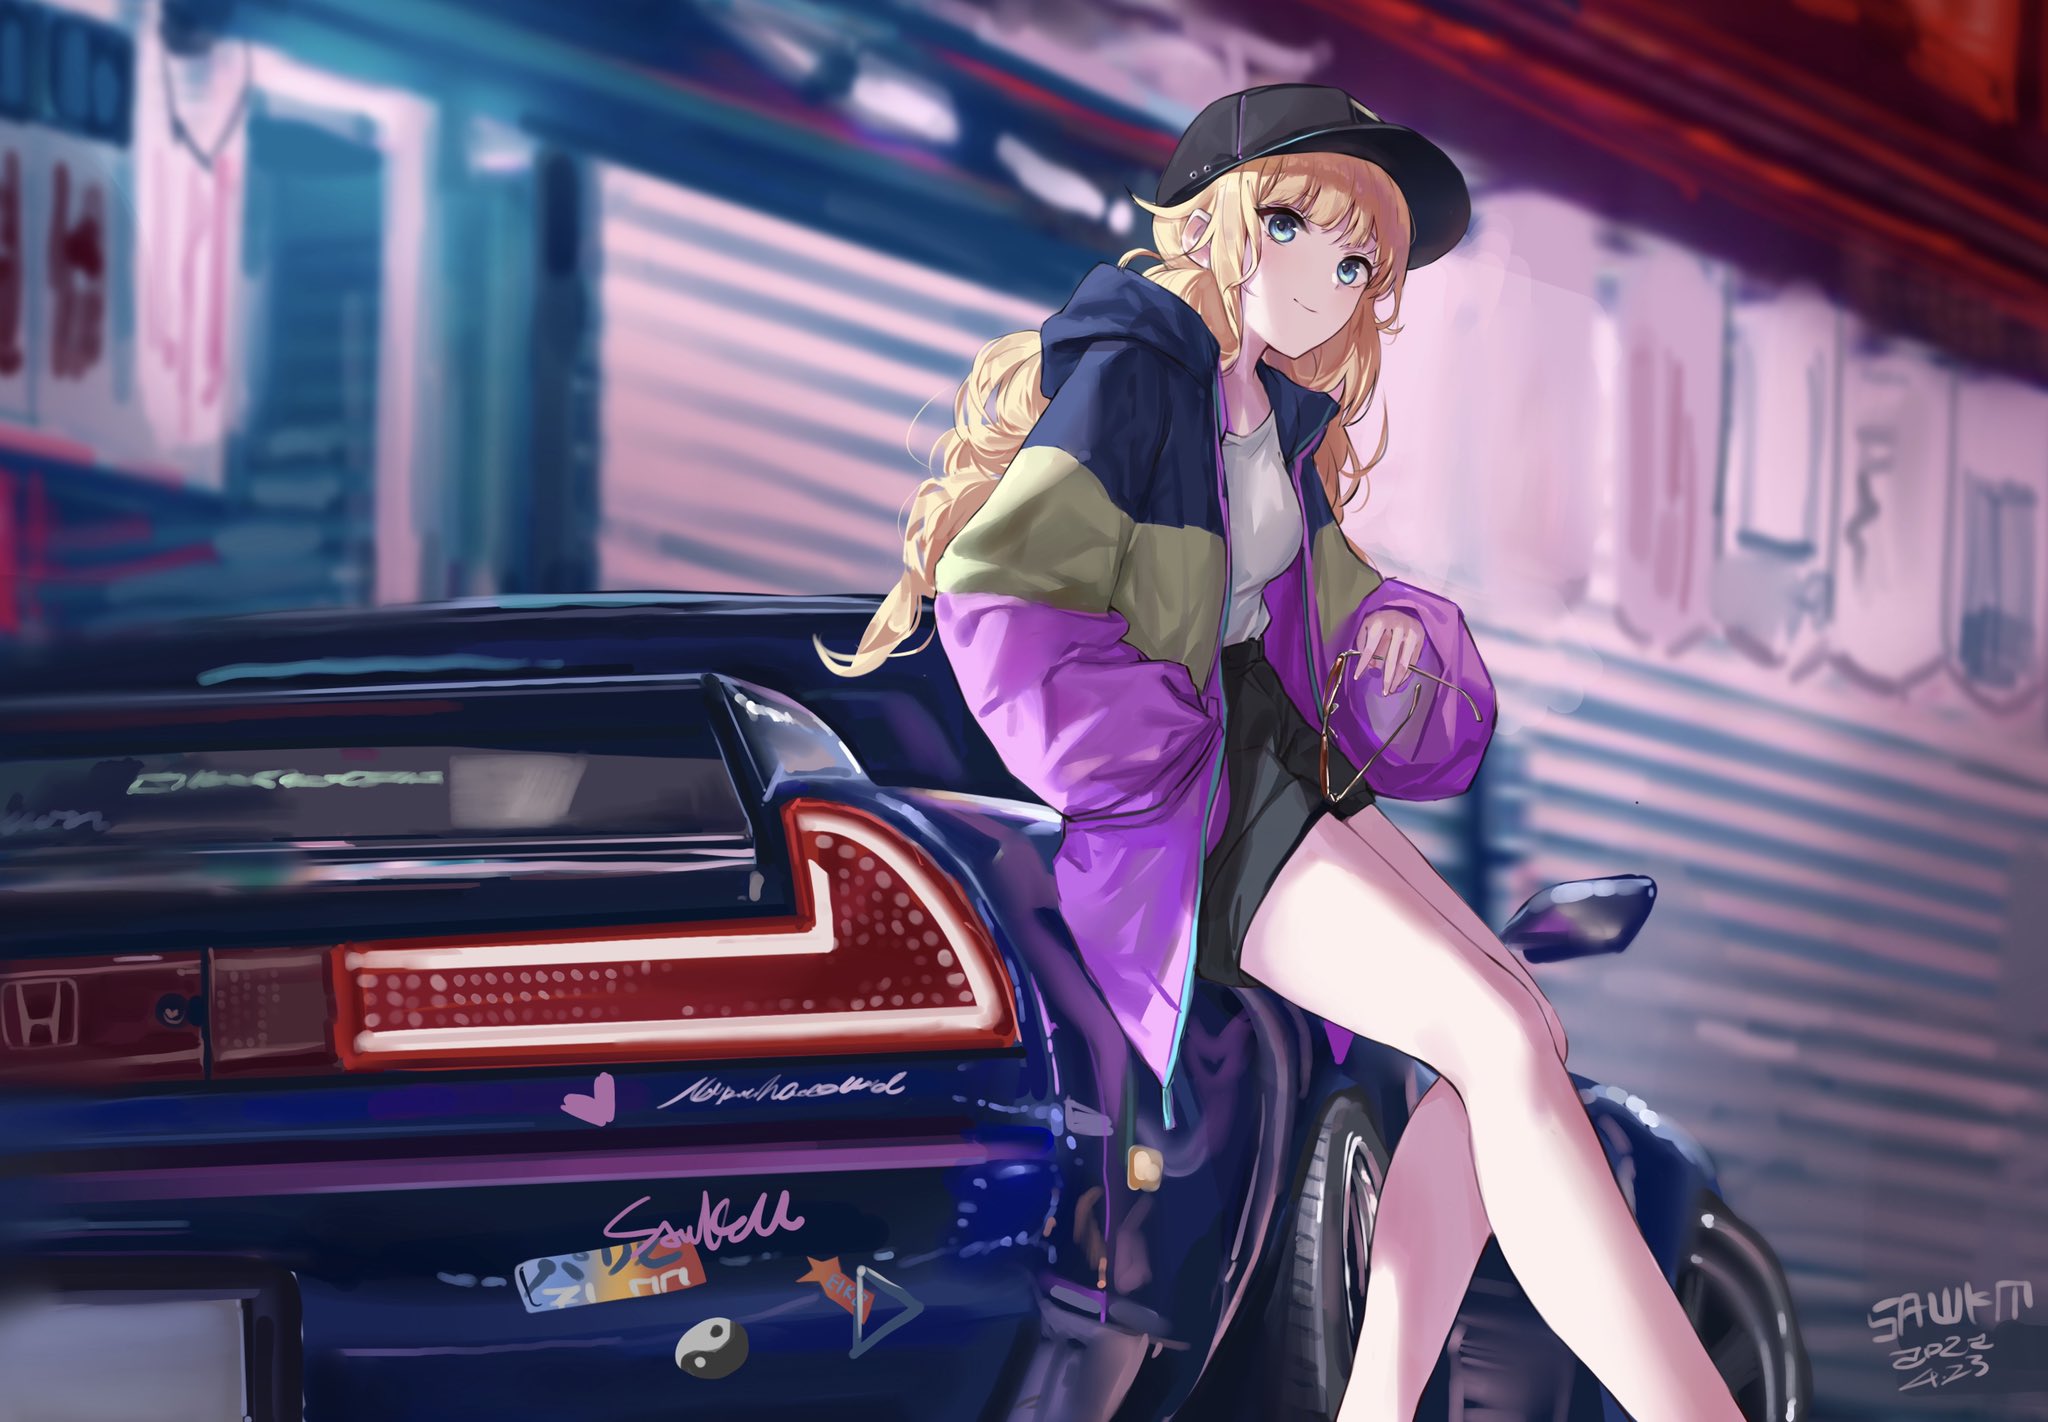 Anime 2048x1422 anime anime girls Paripi Koumei Tsukimi Eiko car blonde jacket open jacket long hair Honda NSX vehicle looking at viewer dated 2023 (year) closed mouth smiling taillights rear view blurred purse